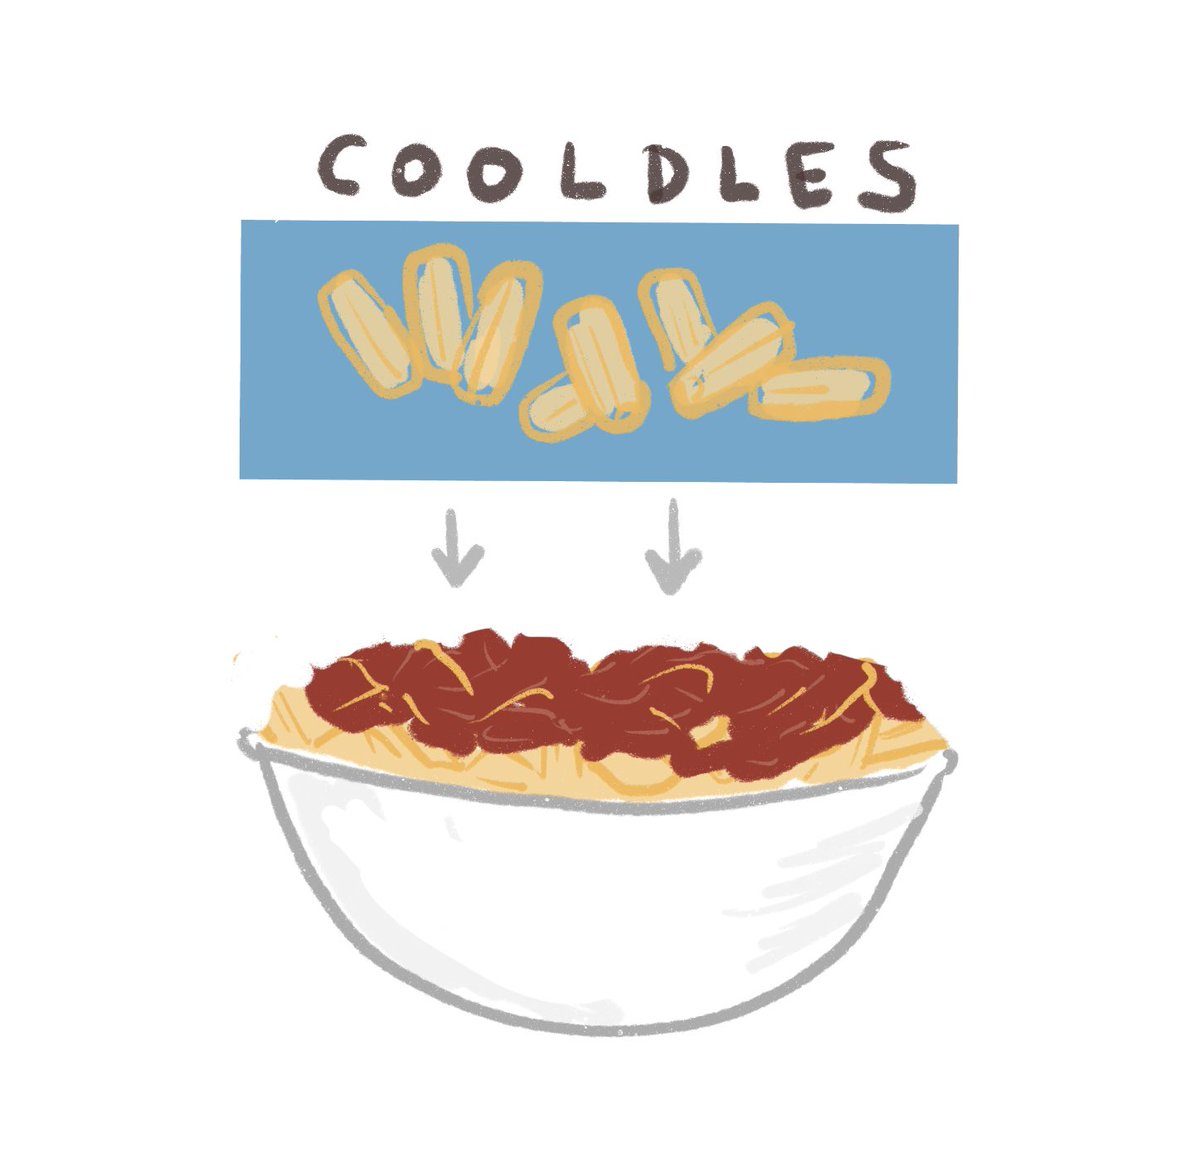 When reheating pasta for a toddler it’s almost impossible to hit the desired noodle warmth ❄️ ❄️ ⭐️ 🔥 🔥 but leaving 10% of the noodles cold allows you to use them as “cooldles” and adjust the warmth so that your toddler refuses to eat the pasta for a completely new reason